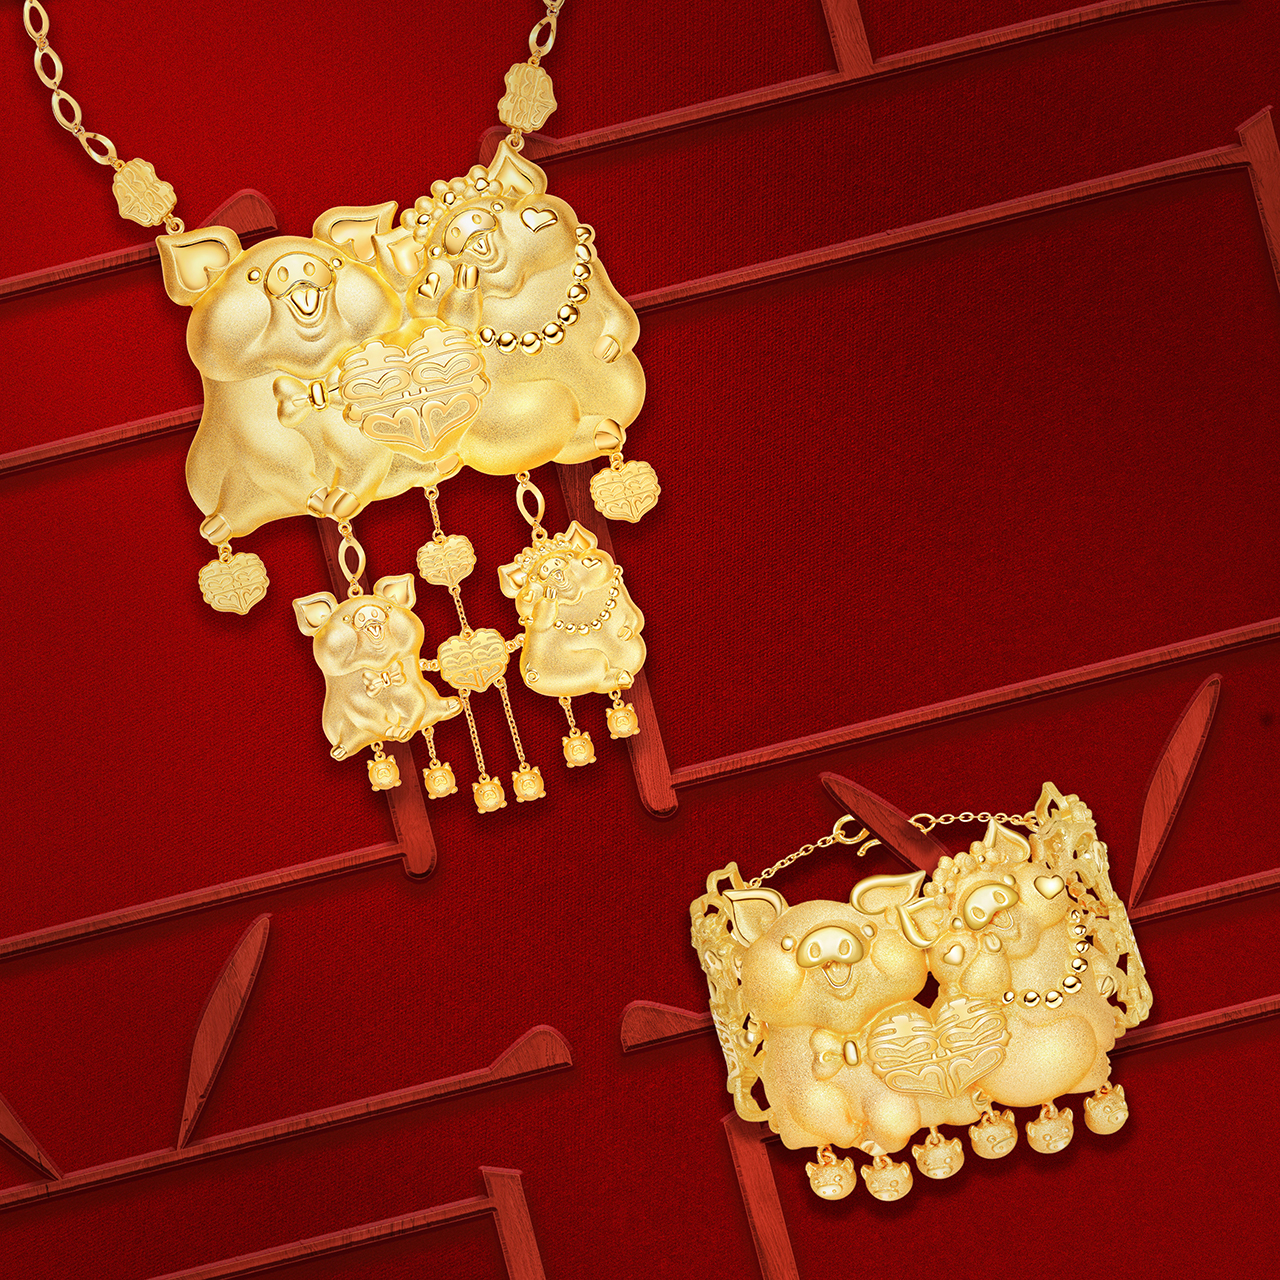 King Fook Jewellery presents 「Blissful Pig」 999.9 Chuk Kam Collection, conveying endless blessings to the newly-weds